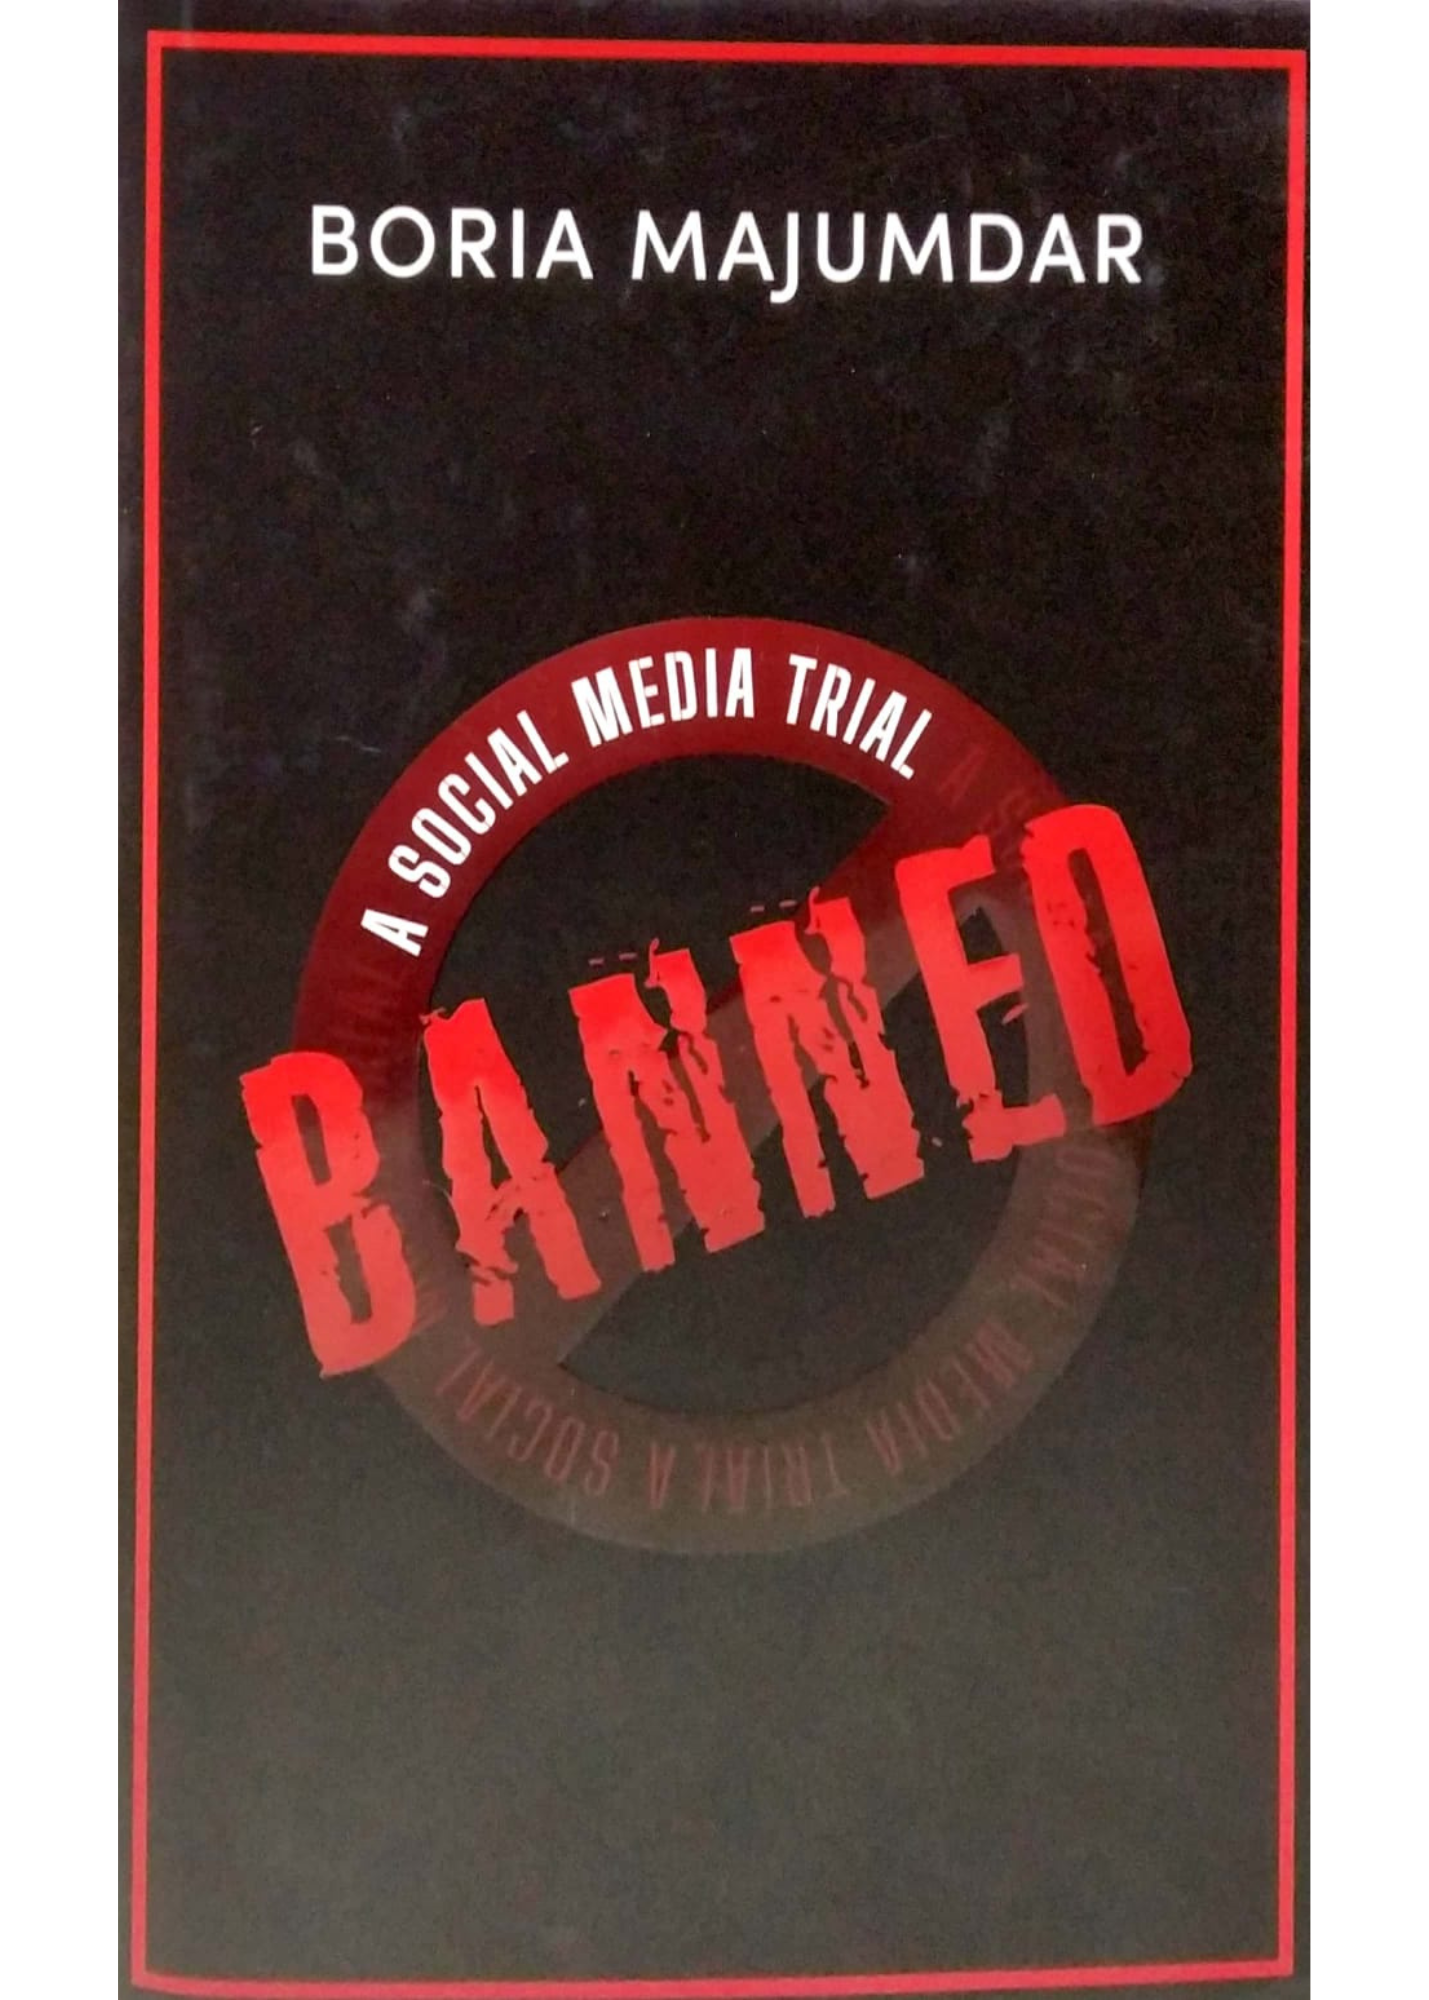 Banned : A Social Media Trial